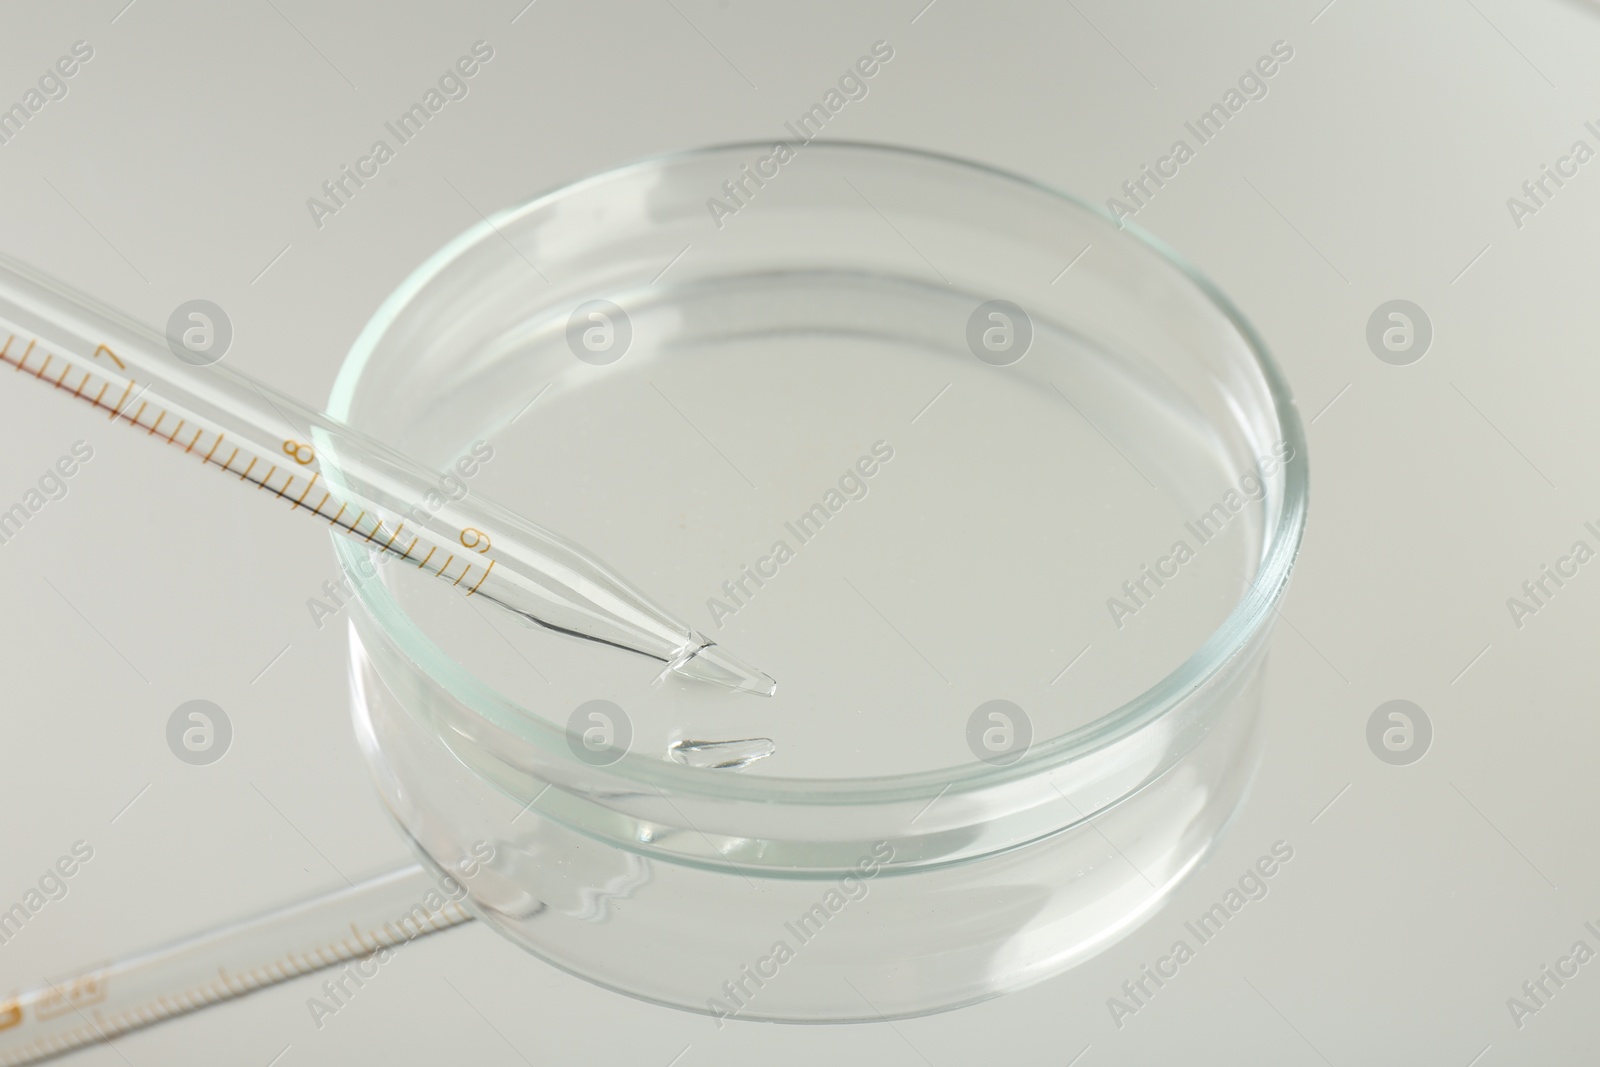 Photo of Petri dish and pipette with liquid sample on mirror surface, closeup